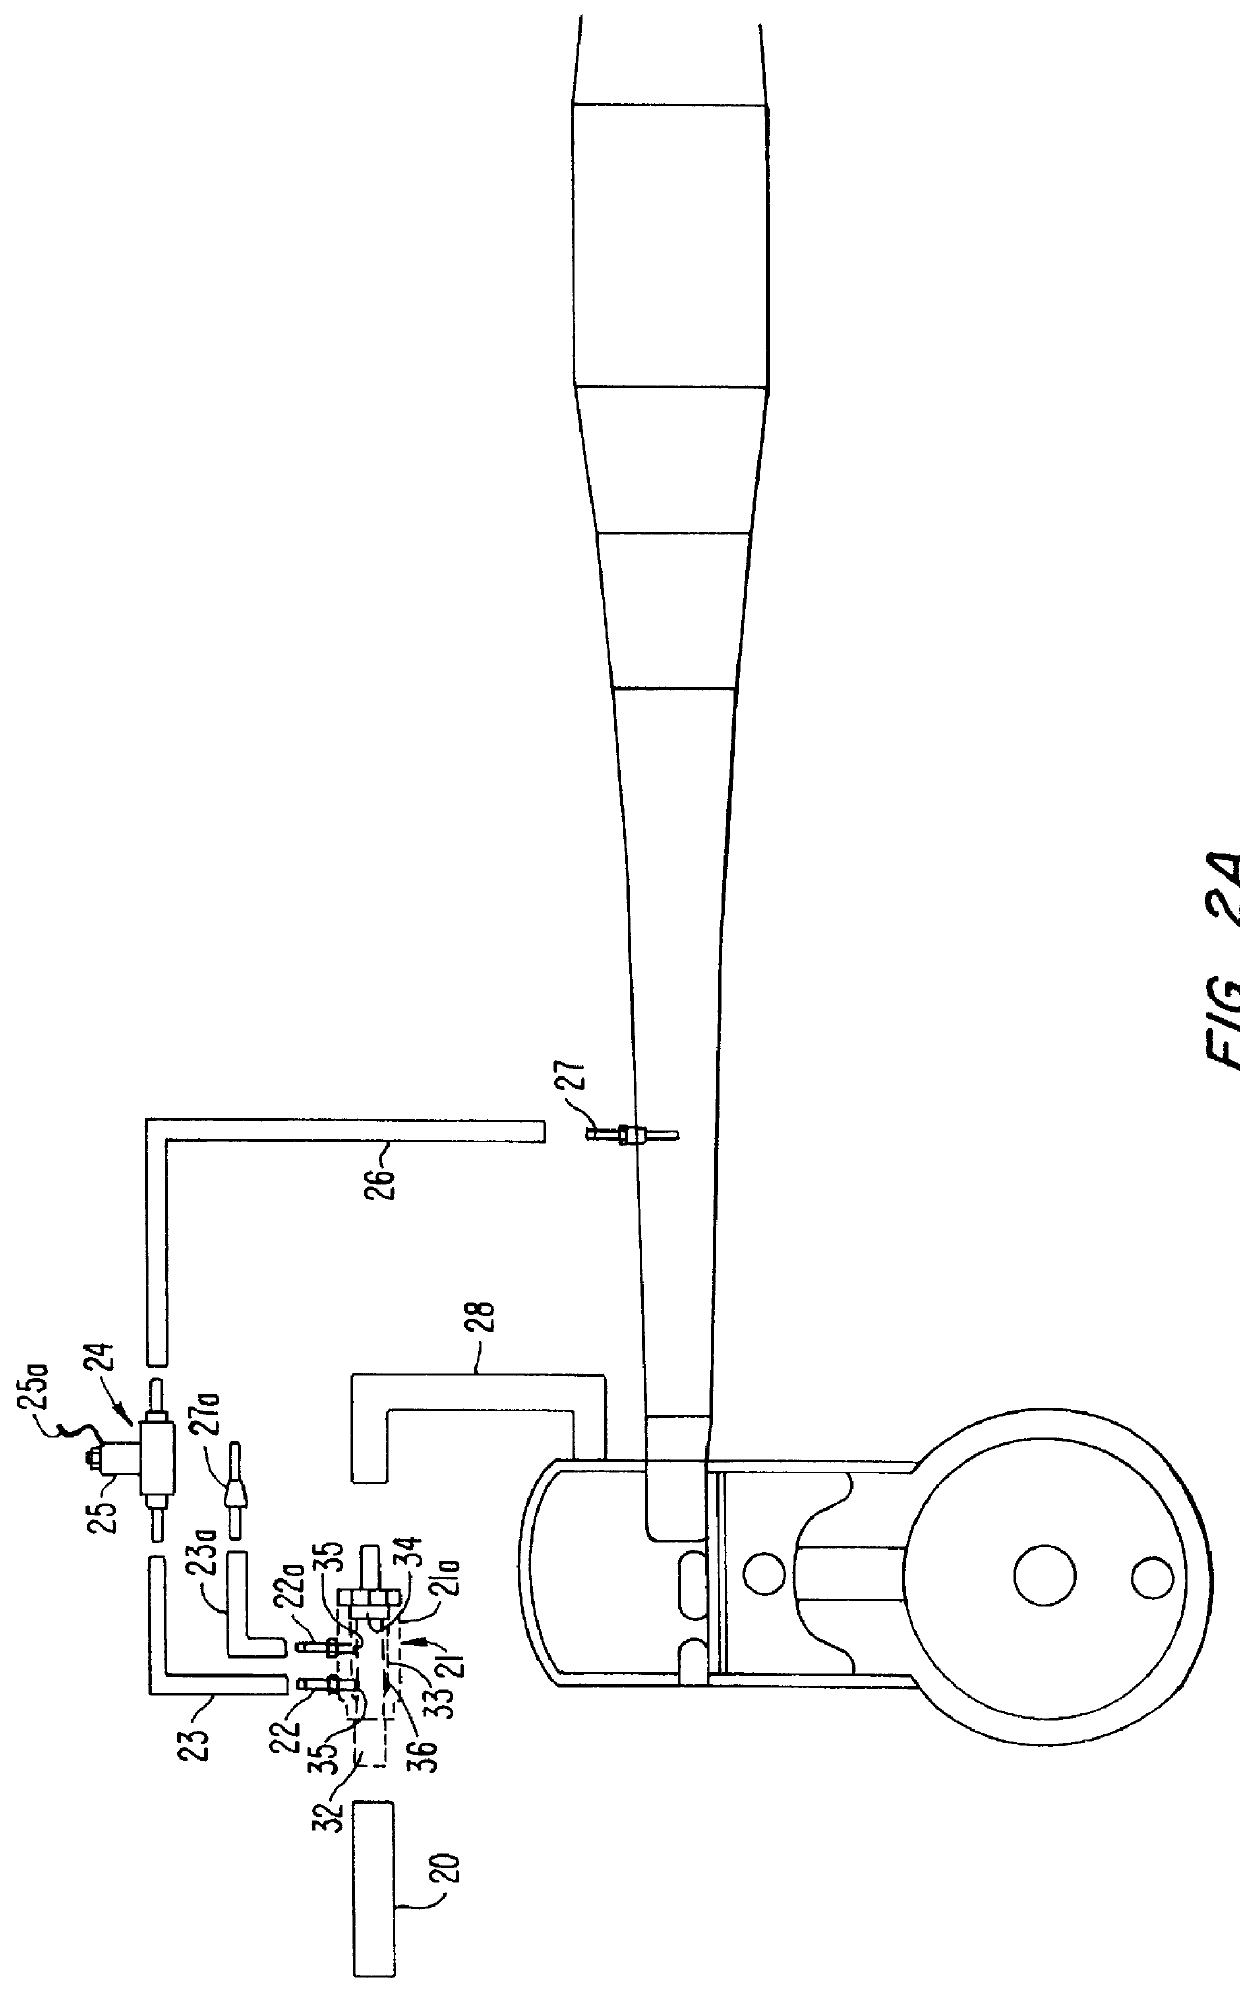 Method and apparatus for improved control of exhaust gas temperature from a two-stroke engine